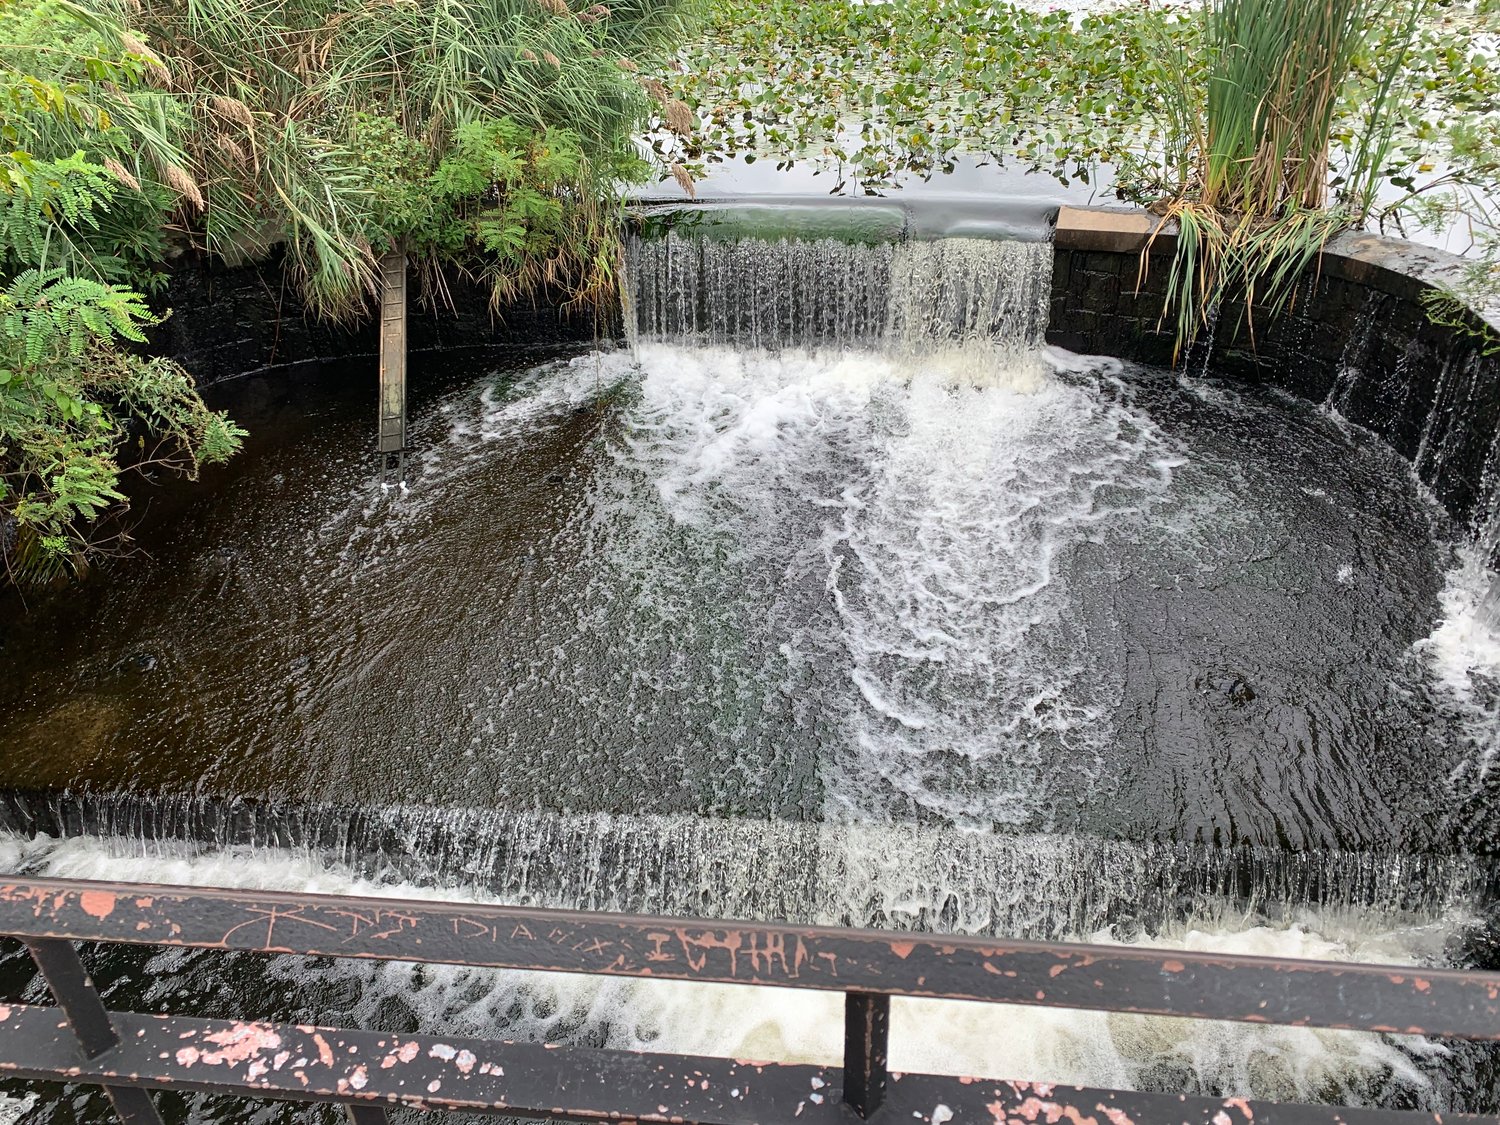 The dam at the end of Bellmore Creek blocks Herring from spawning in Mill Pond. The Fish Passage Project will likely install a ladder or man-made channel to help them pass.